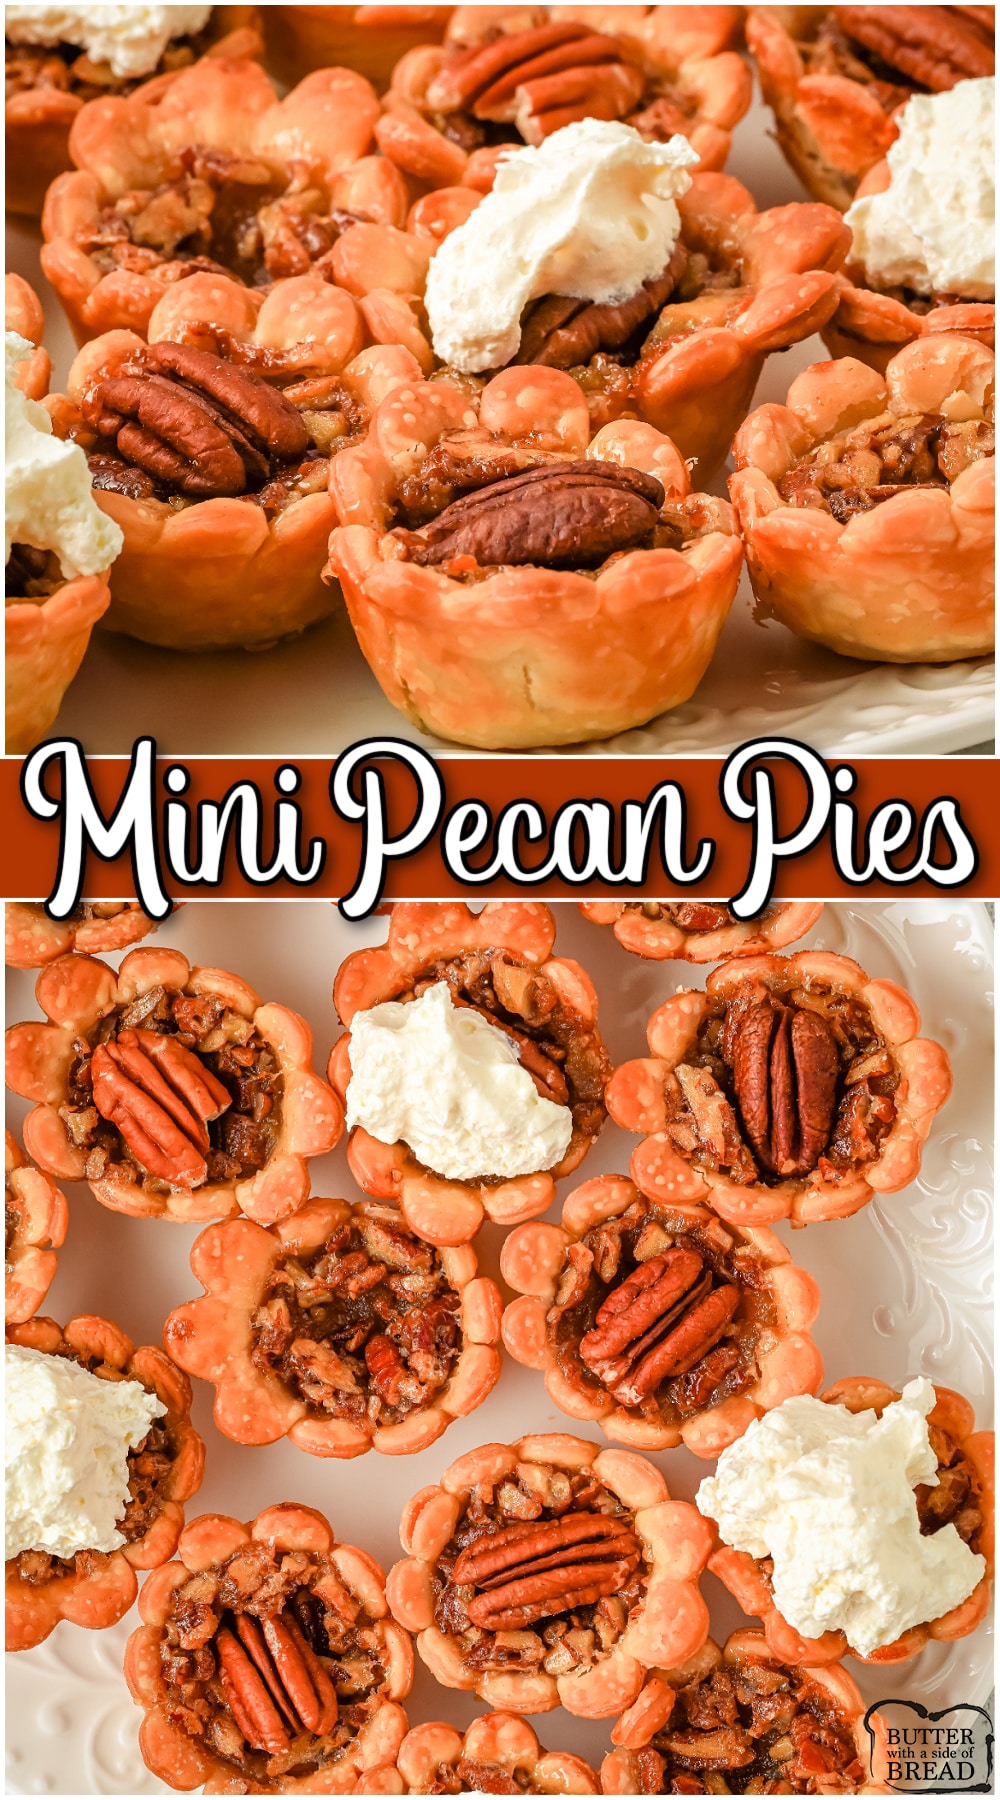 Mini Pecan Pies are the perfect addition to your Thanksgiving table! These personal pecan pies are incredible & made easily with brown sugar, butter, corn syrup & pecans!